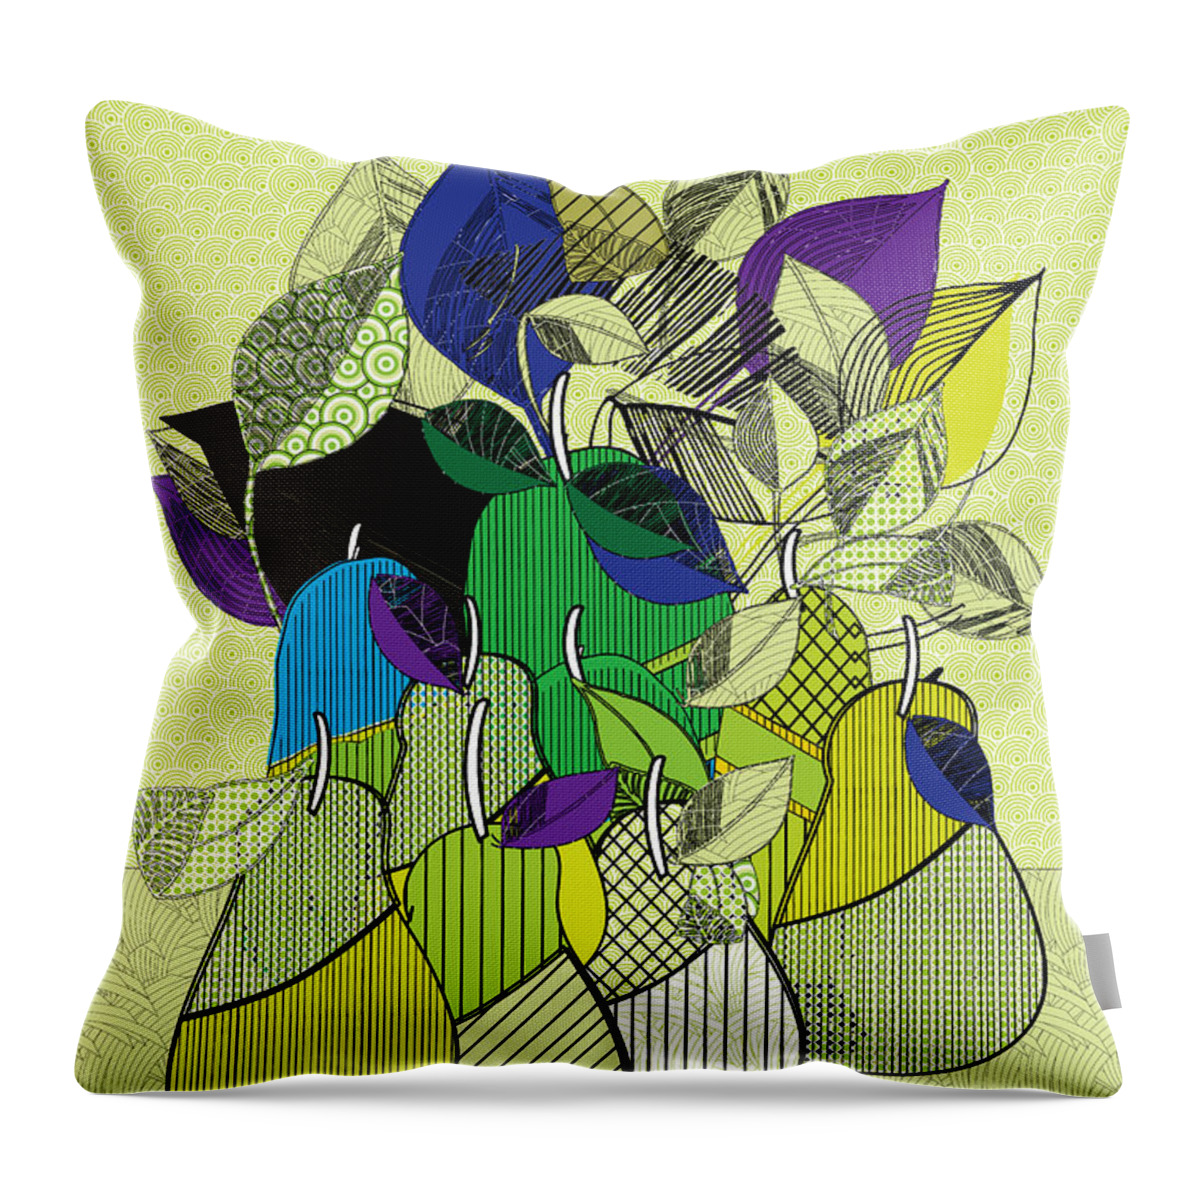 Pears Throw Pillow featuring the drawing Pears by Cecely Bloom